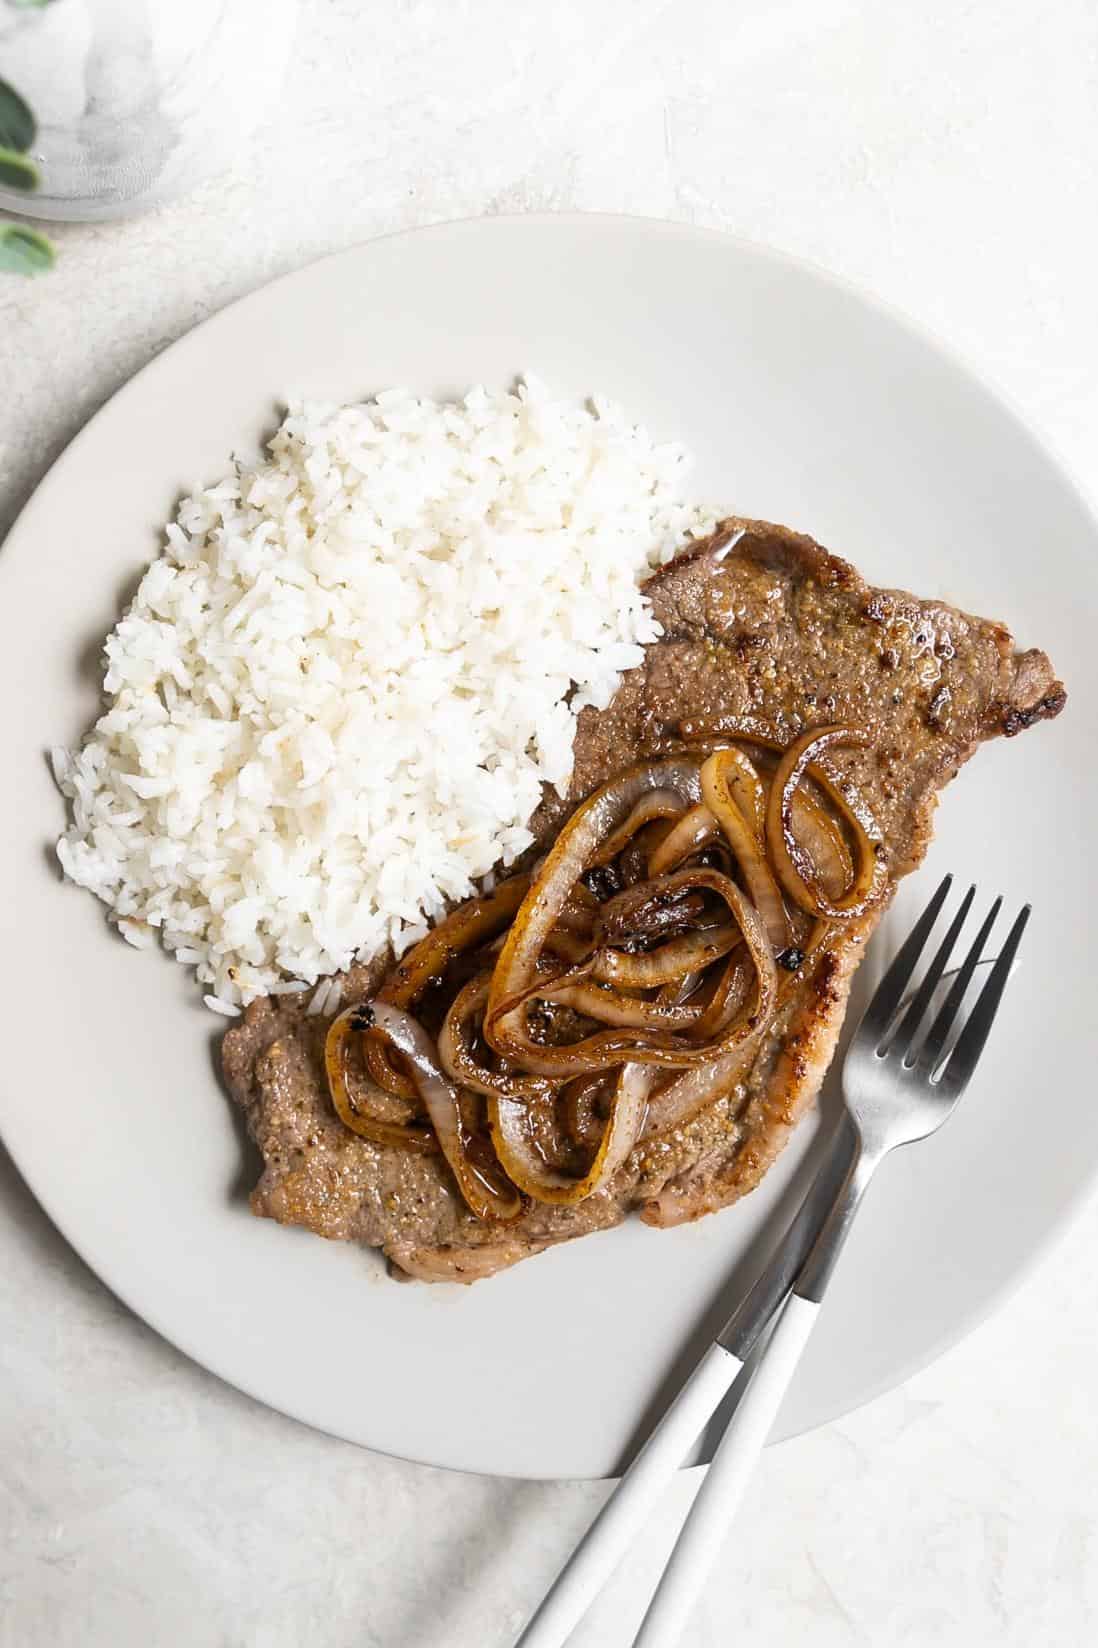  The delicious aroma of the pan-fried steak will transport you to the vibrant streets of Havana.